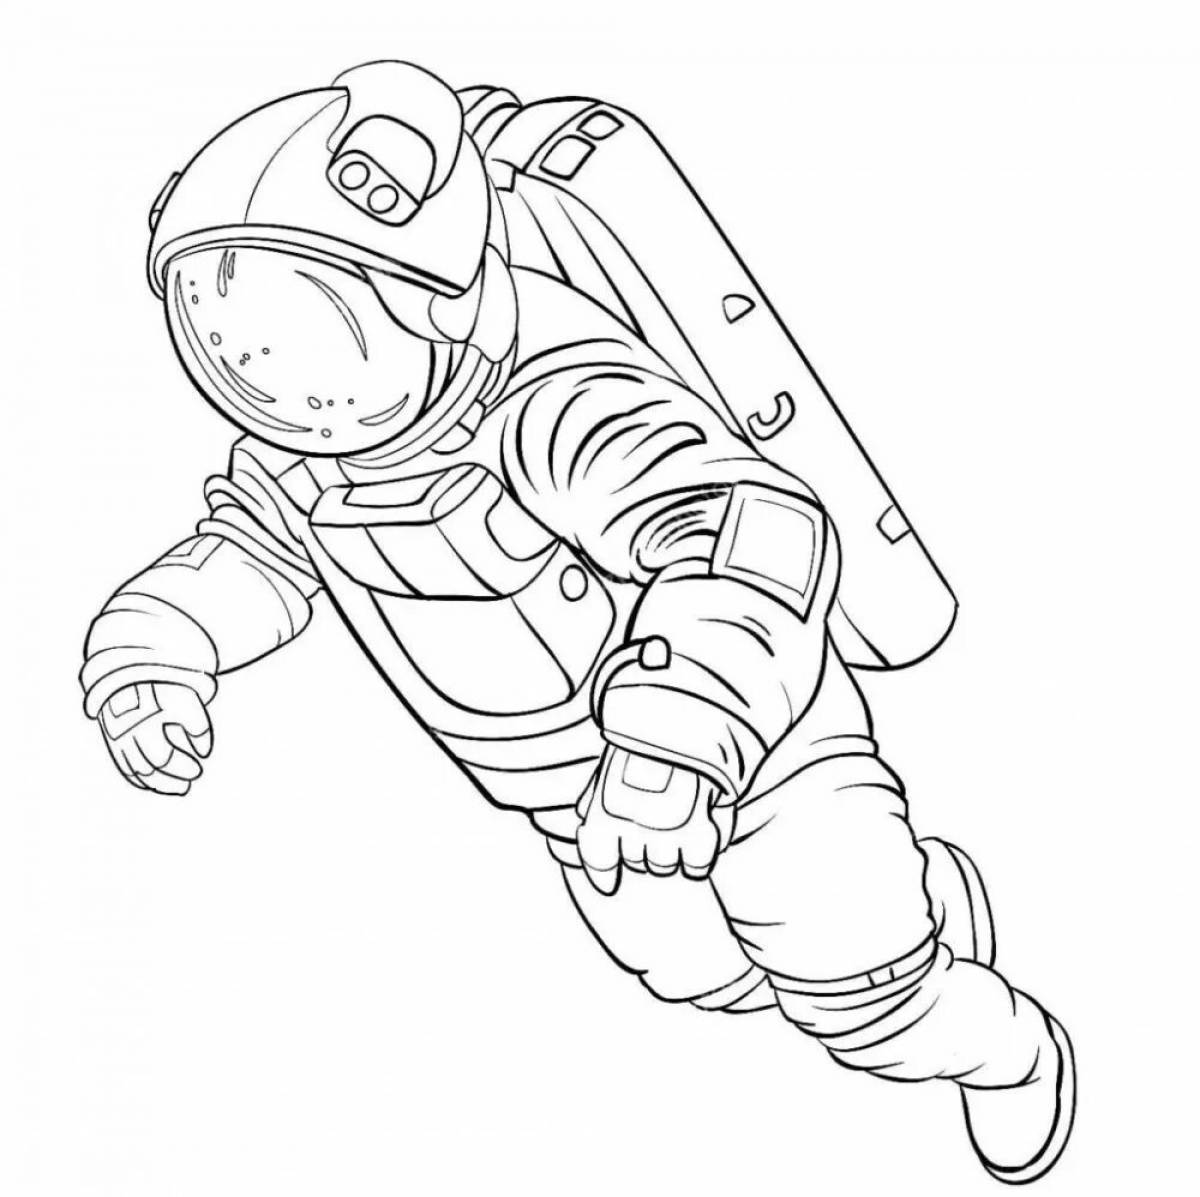 Spaceman in space suit #2